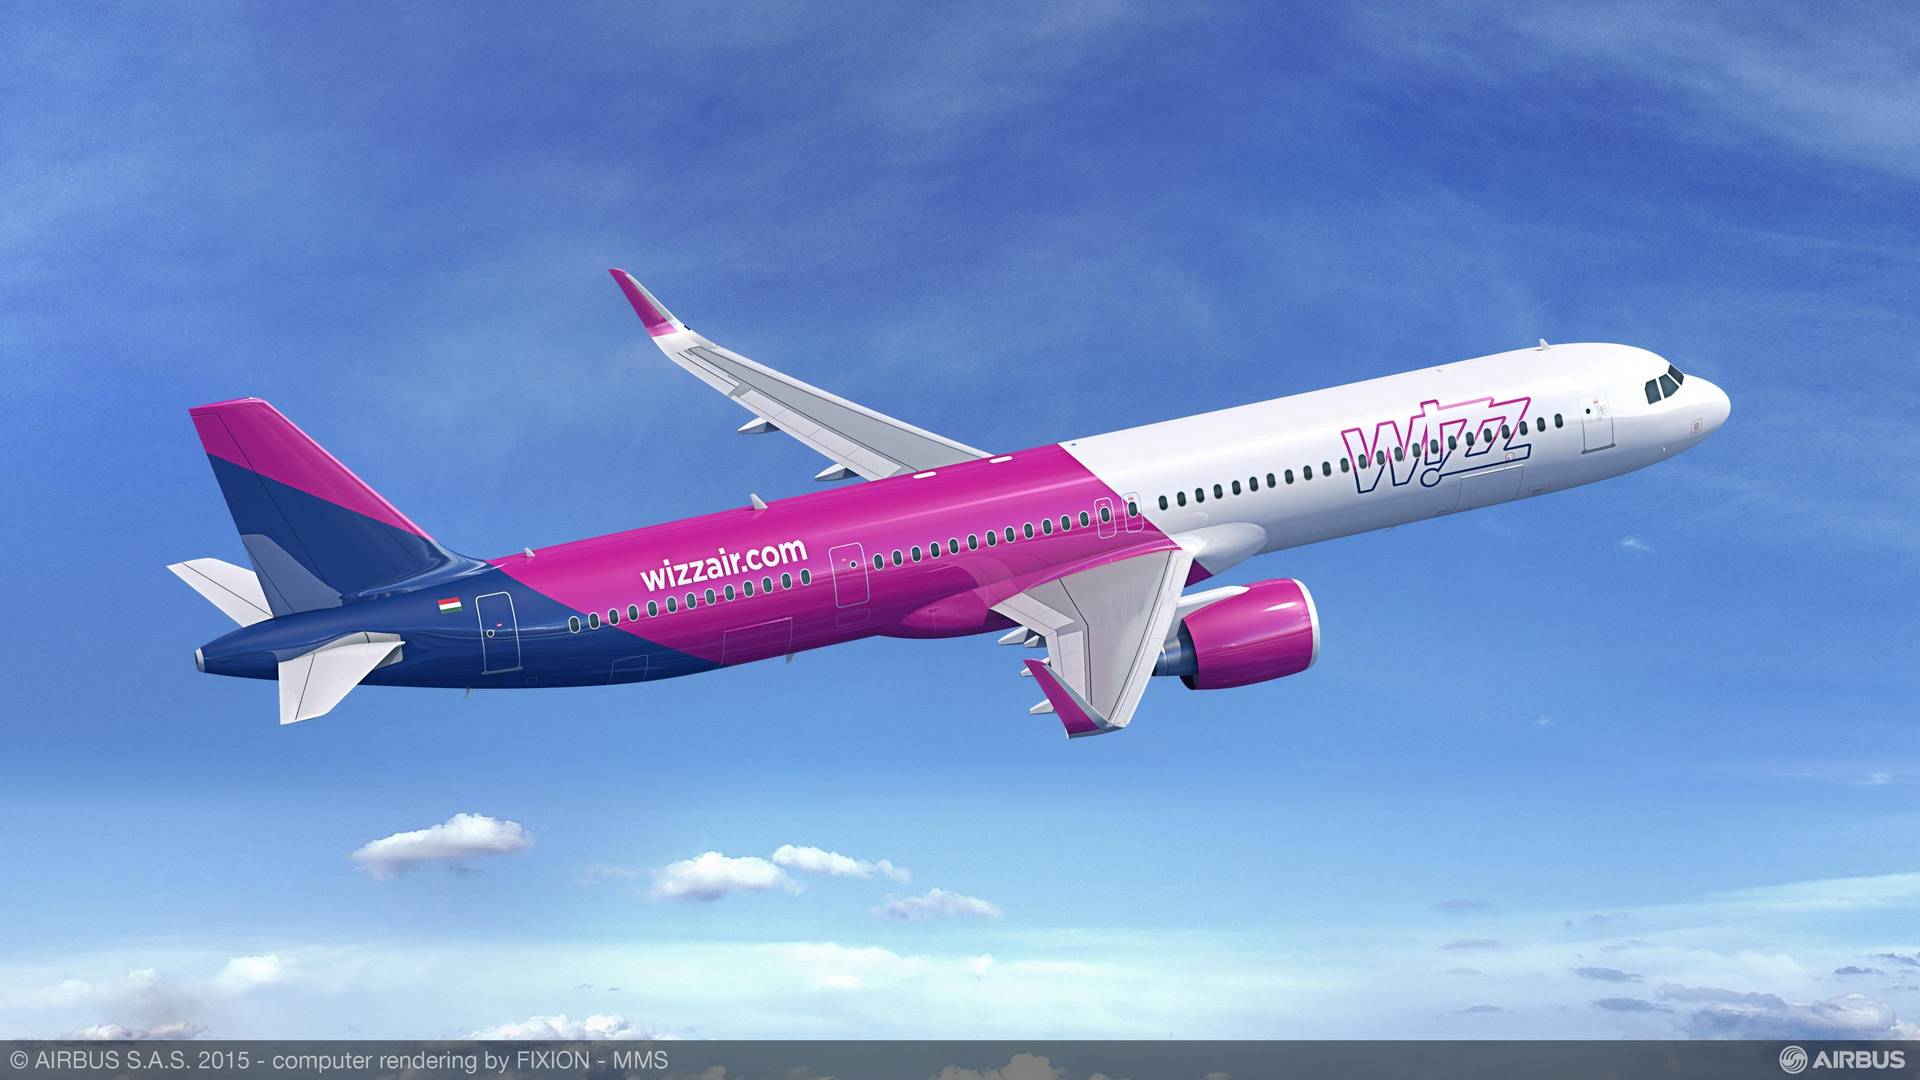 Wizz Air Orders More Airbus A321neo Narrowbodies